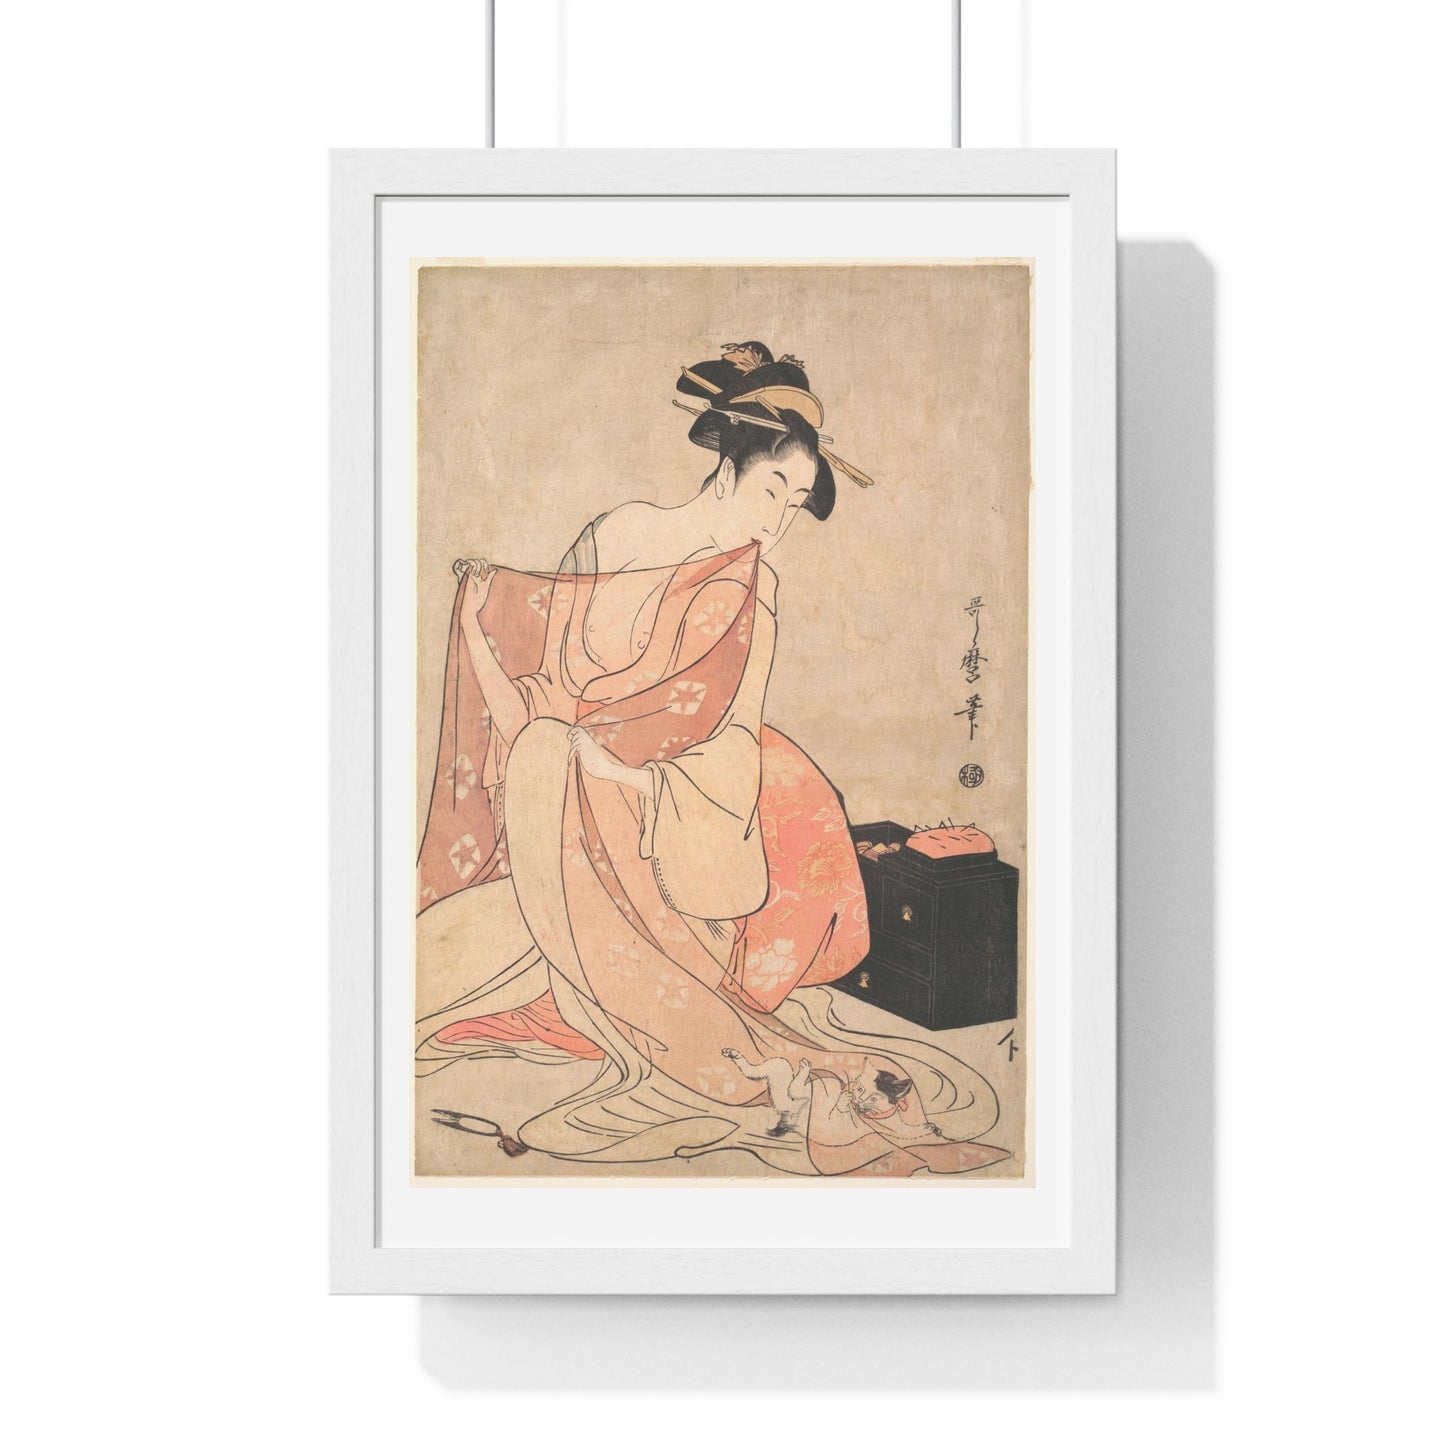 A Woman and a Cat (1793-1794) by Kitagawa Utamaro, from the Original, Framed Art Print